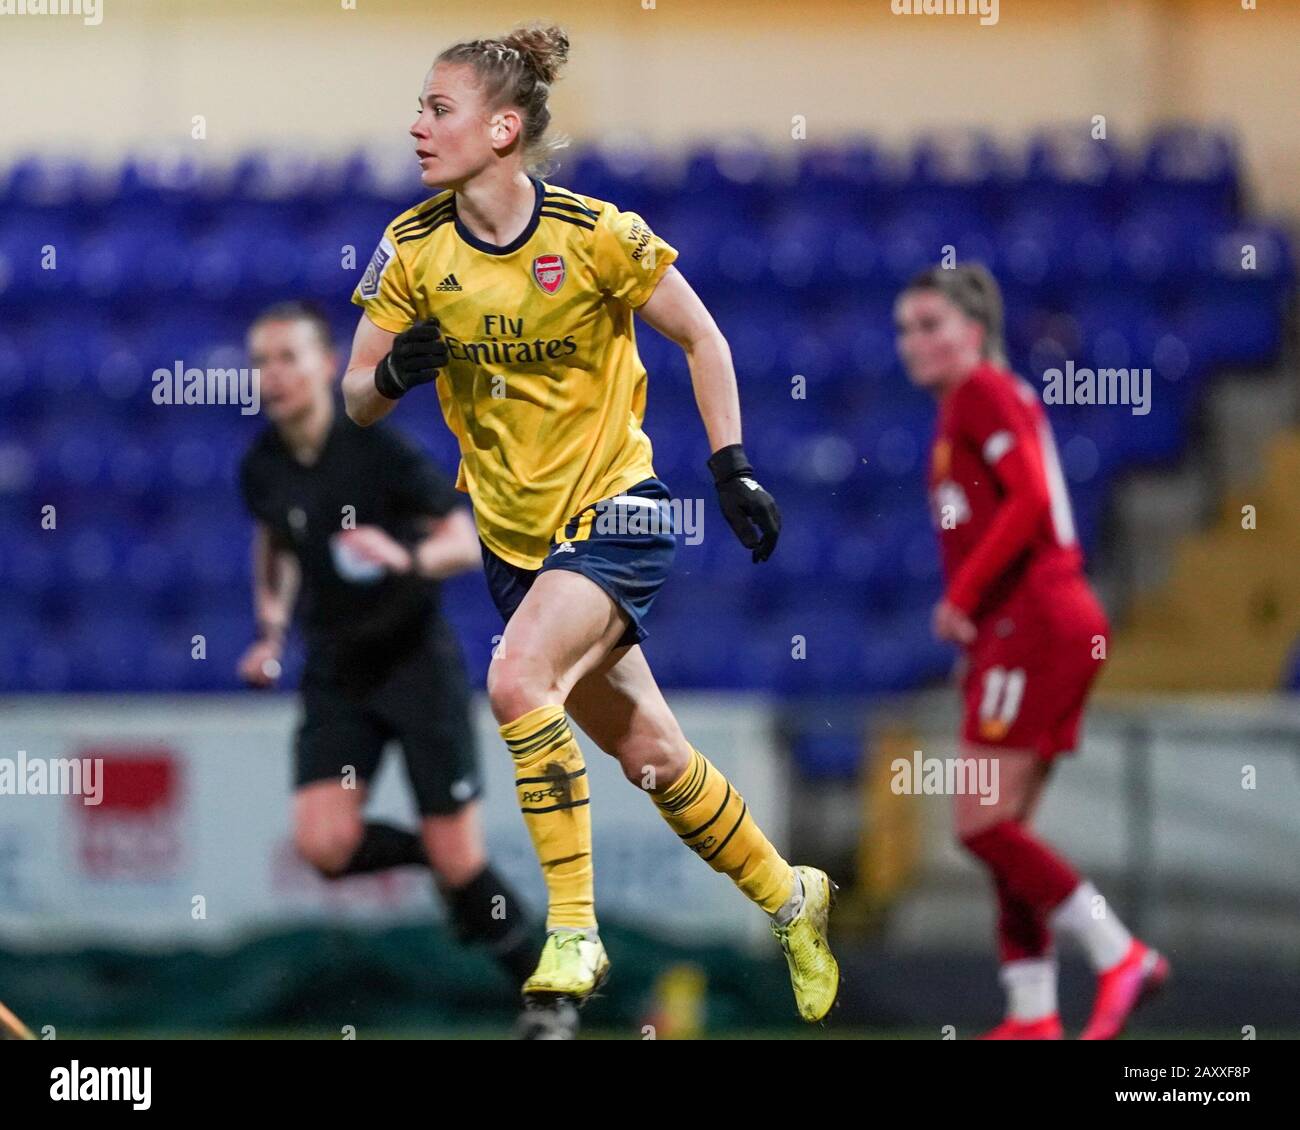 CHESTER. ENGLAND. FEB 13th: Leonie Maier of Arsenal in action  during the Women’s Super League game between Liverpool Women and Arsenal Women at The Deva Stadium in Chester, England. (Photo by Daniela Porcelli/SPP) Stock Photo